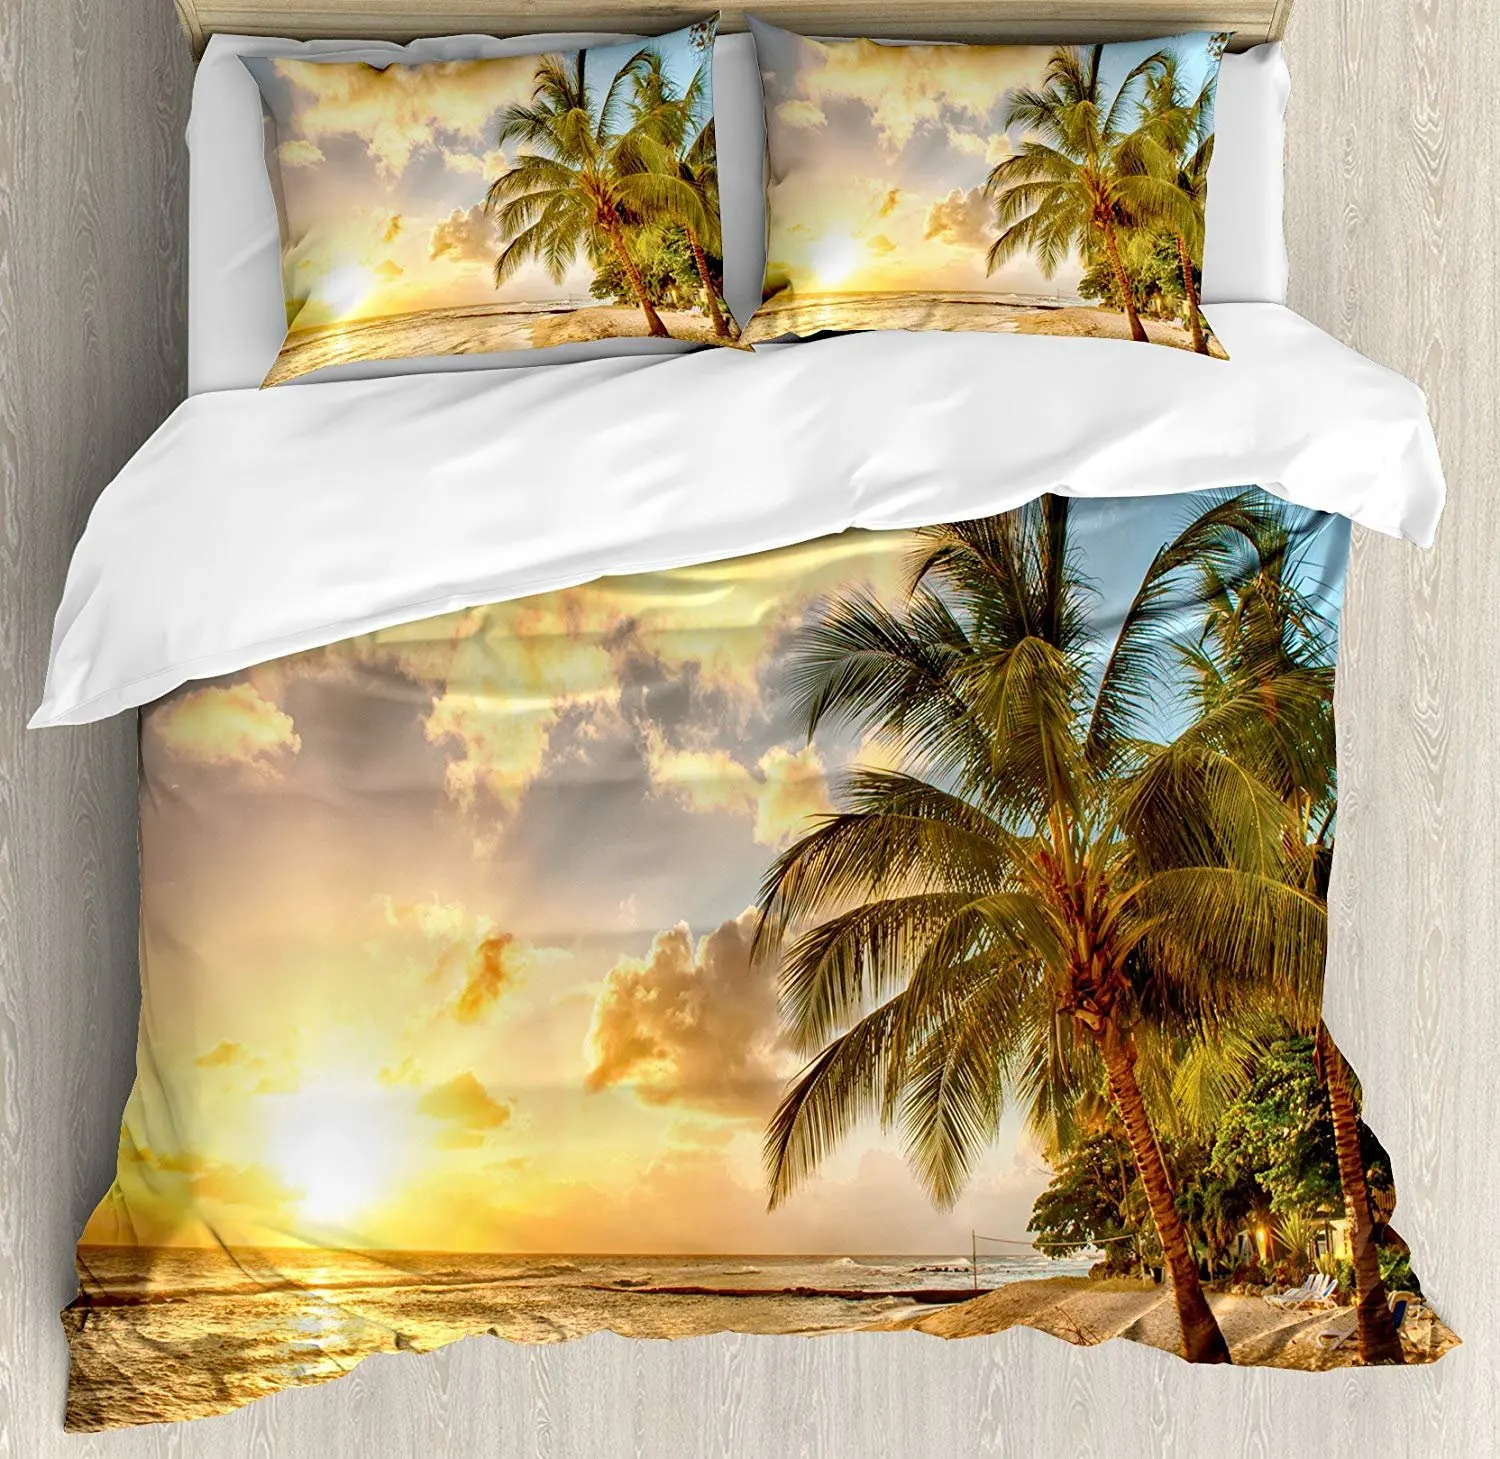 

Beach Bedding Set Tropic Sandy Beach with Horizon at the Sunset and Coconut Palm Trees Summer Photo Duvet Cover Pillowcase